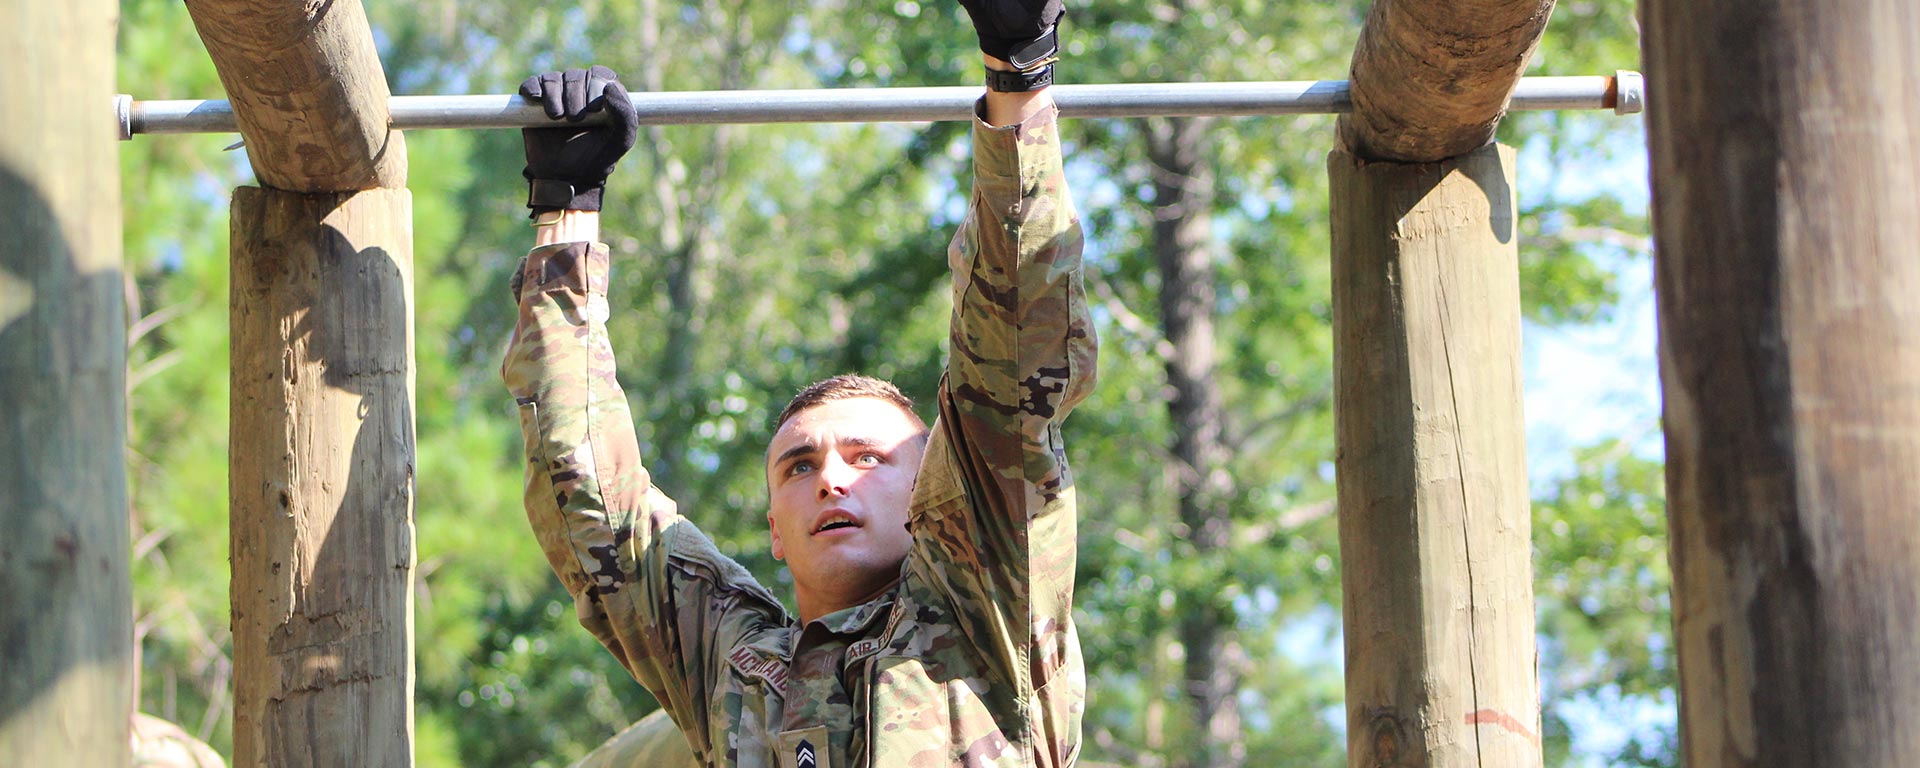 Daniel McPartland crosses the monkey bars on a ROTC obstacle course.